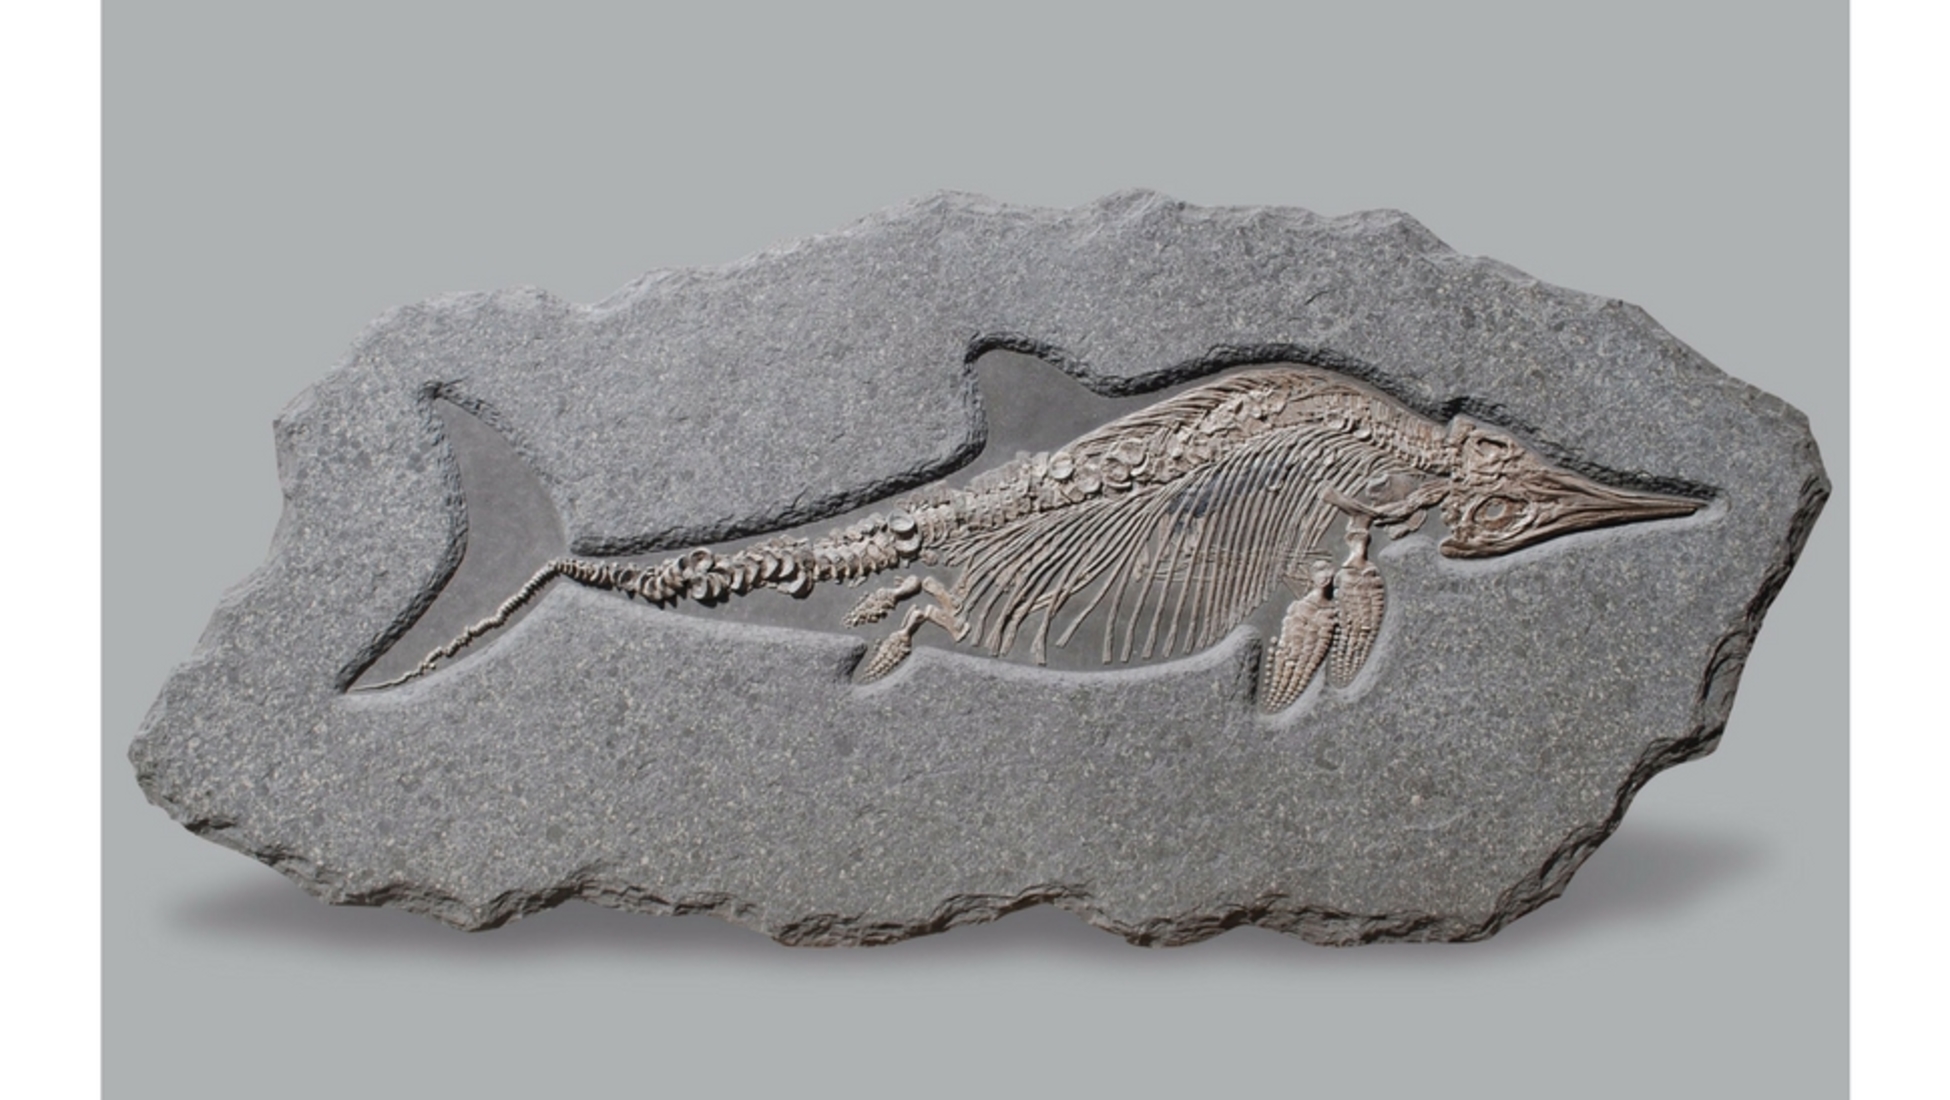 Auction alert: A Fossil of a Real Sea Monster, an Ichthyosaur, up for  auction - Catawiki